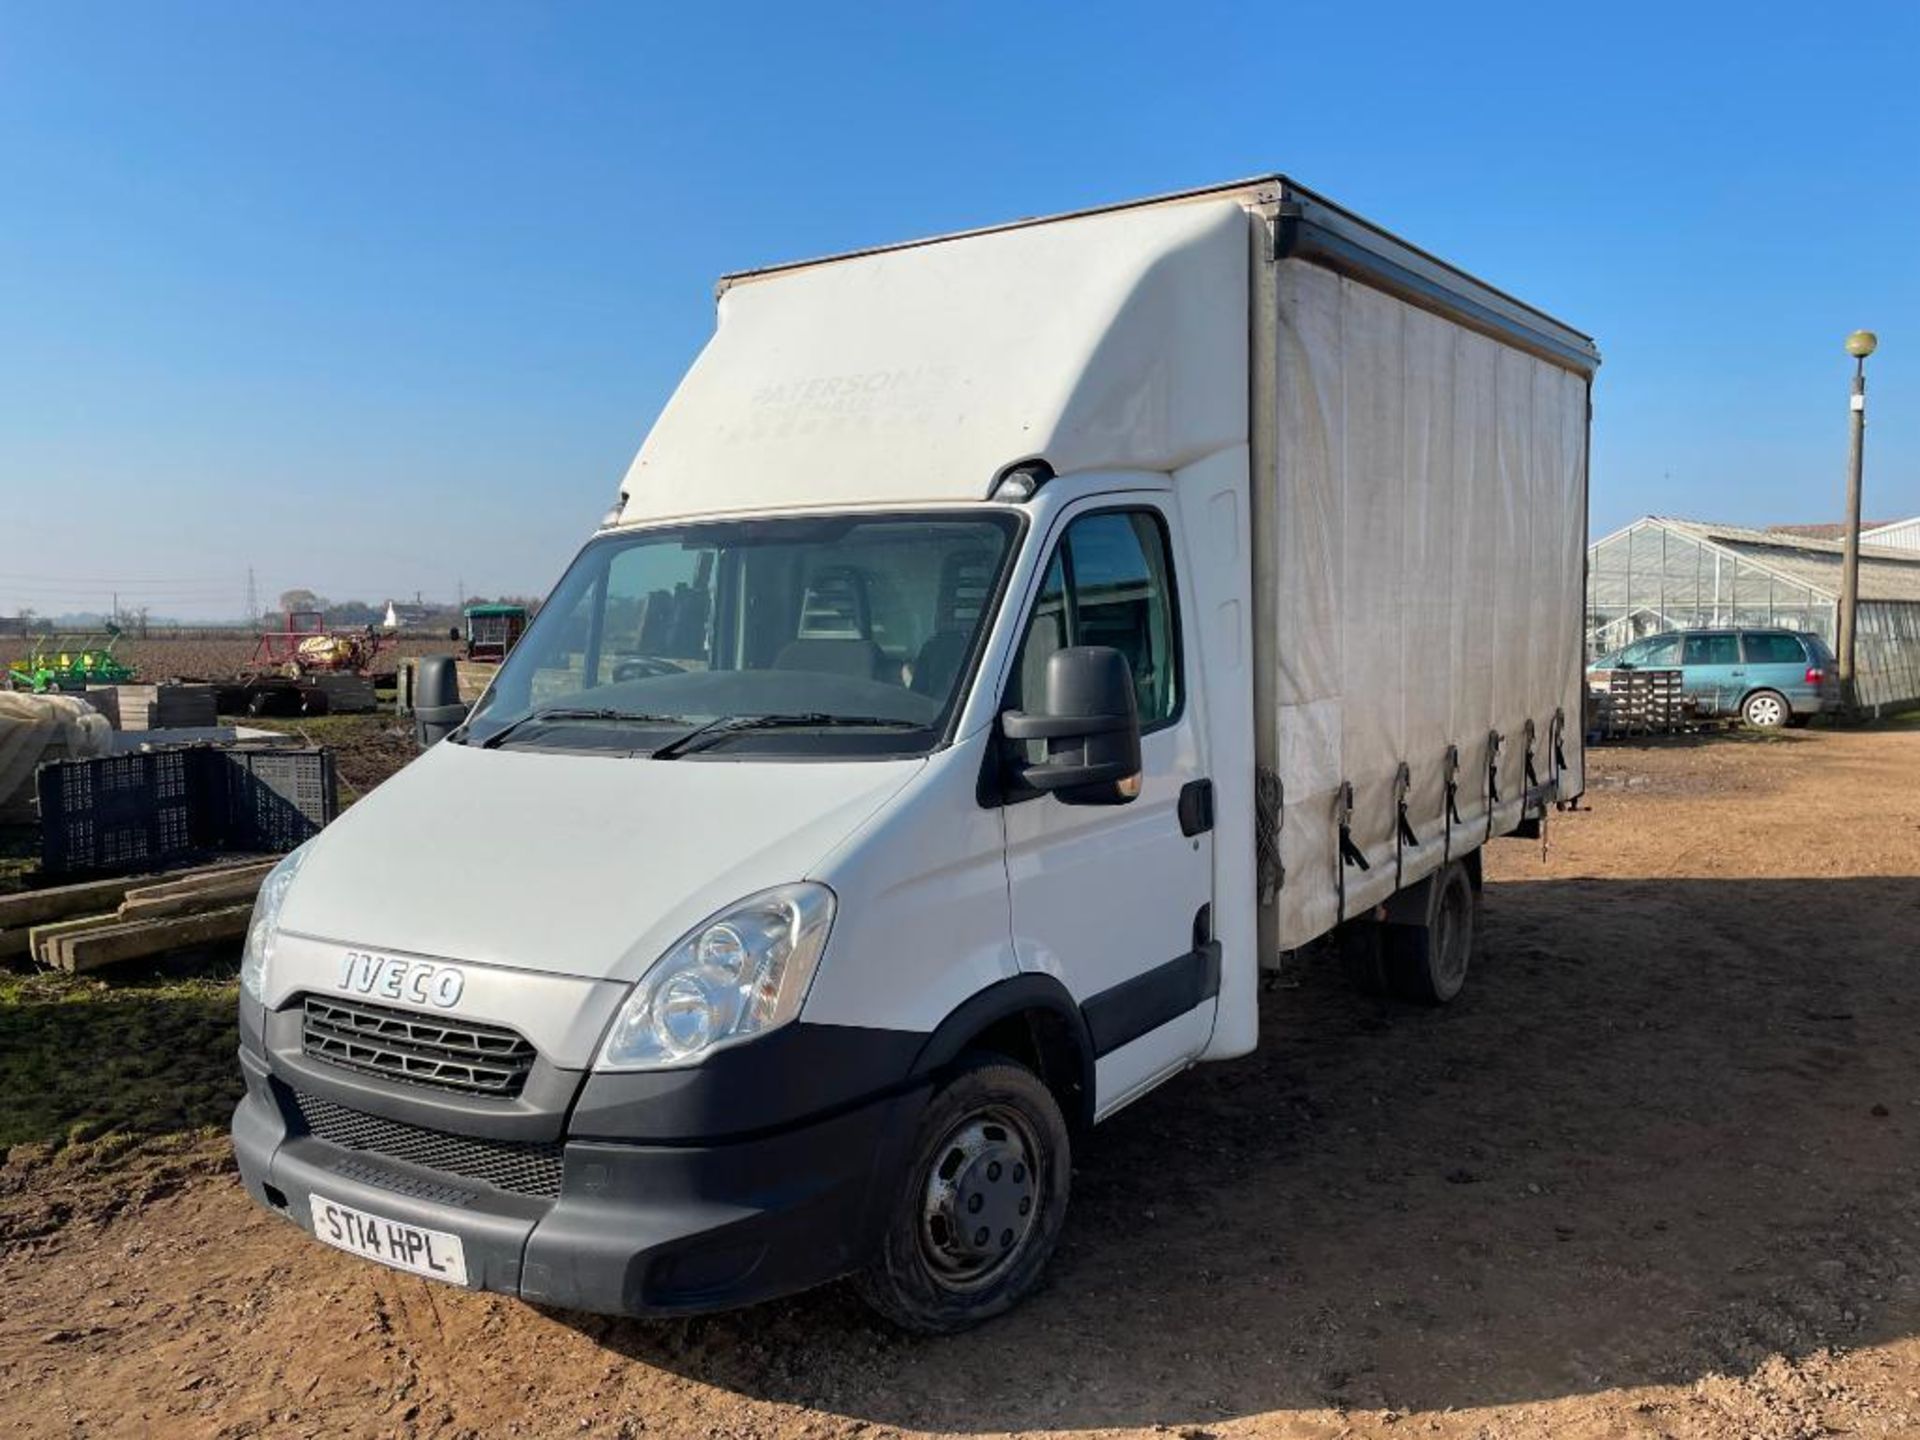 2014 Iveco 35C13 dual wheel 14' curtain side van with 3 seater cab, 6-speed manual. Reg No: ST14 HPL - Image 4 of 8